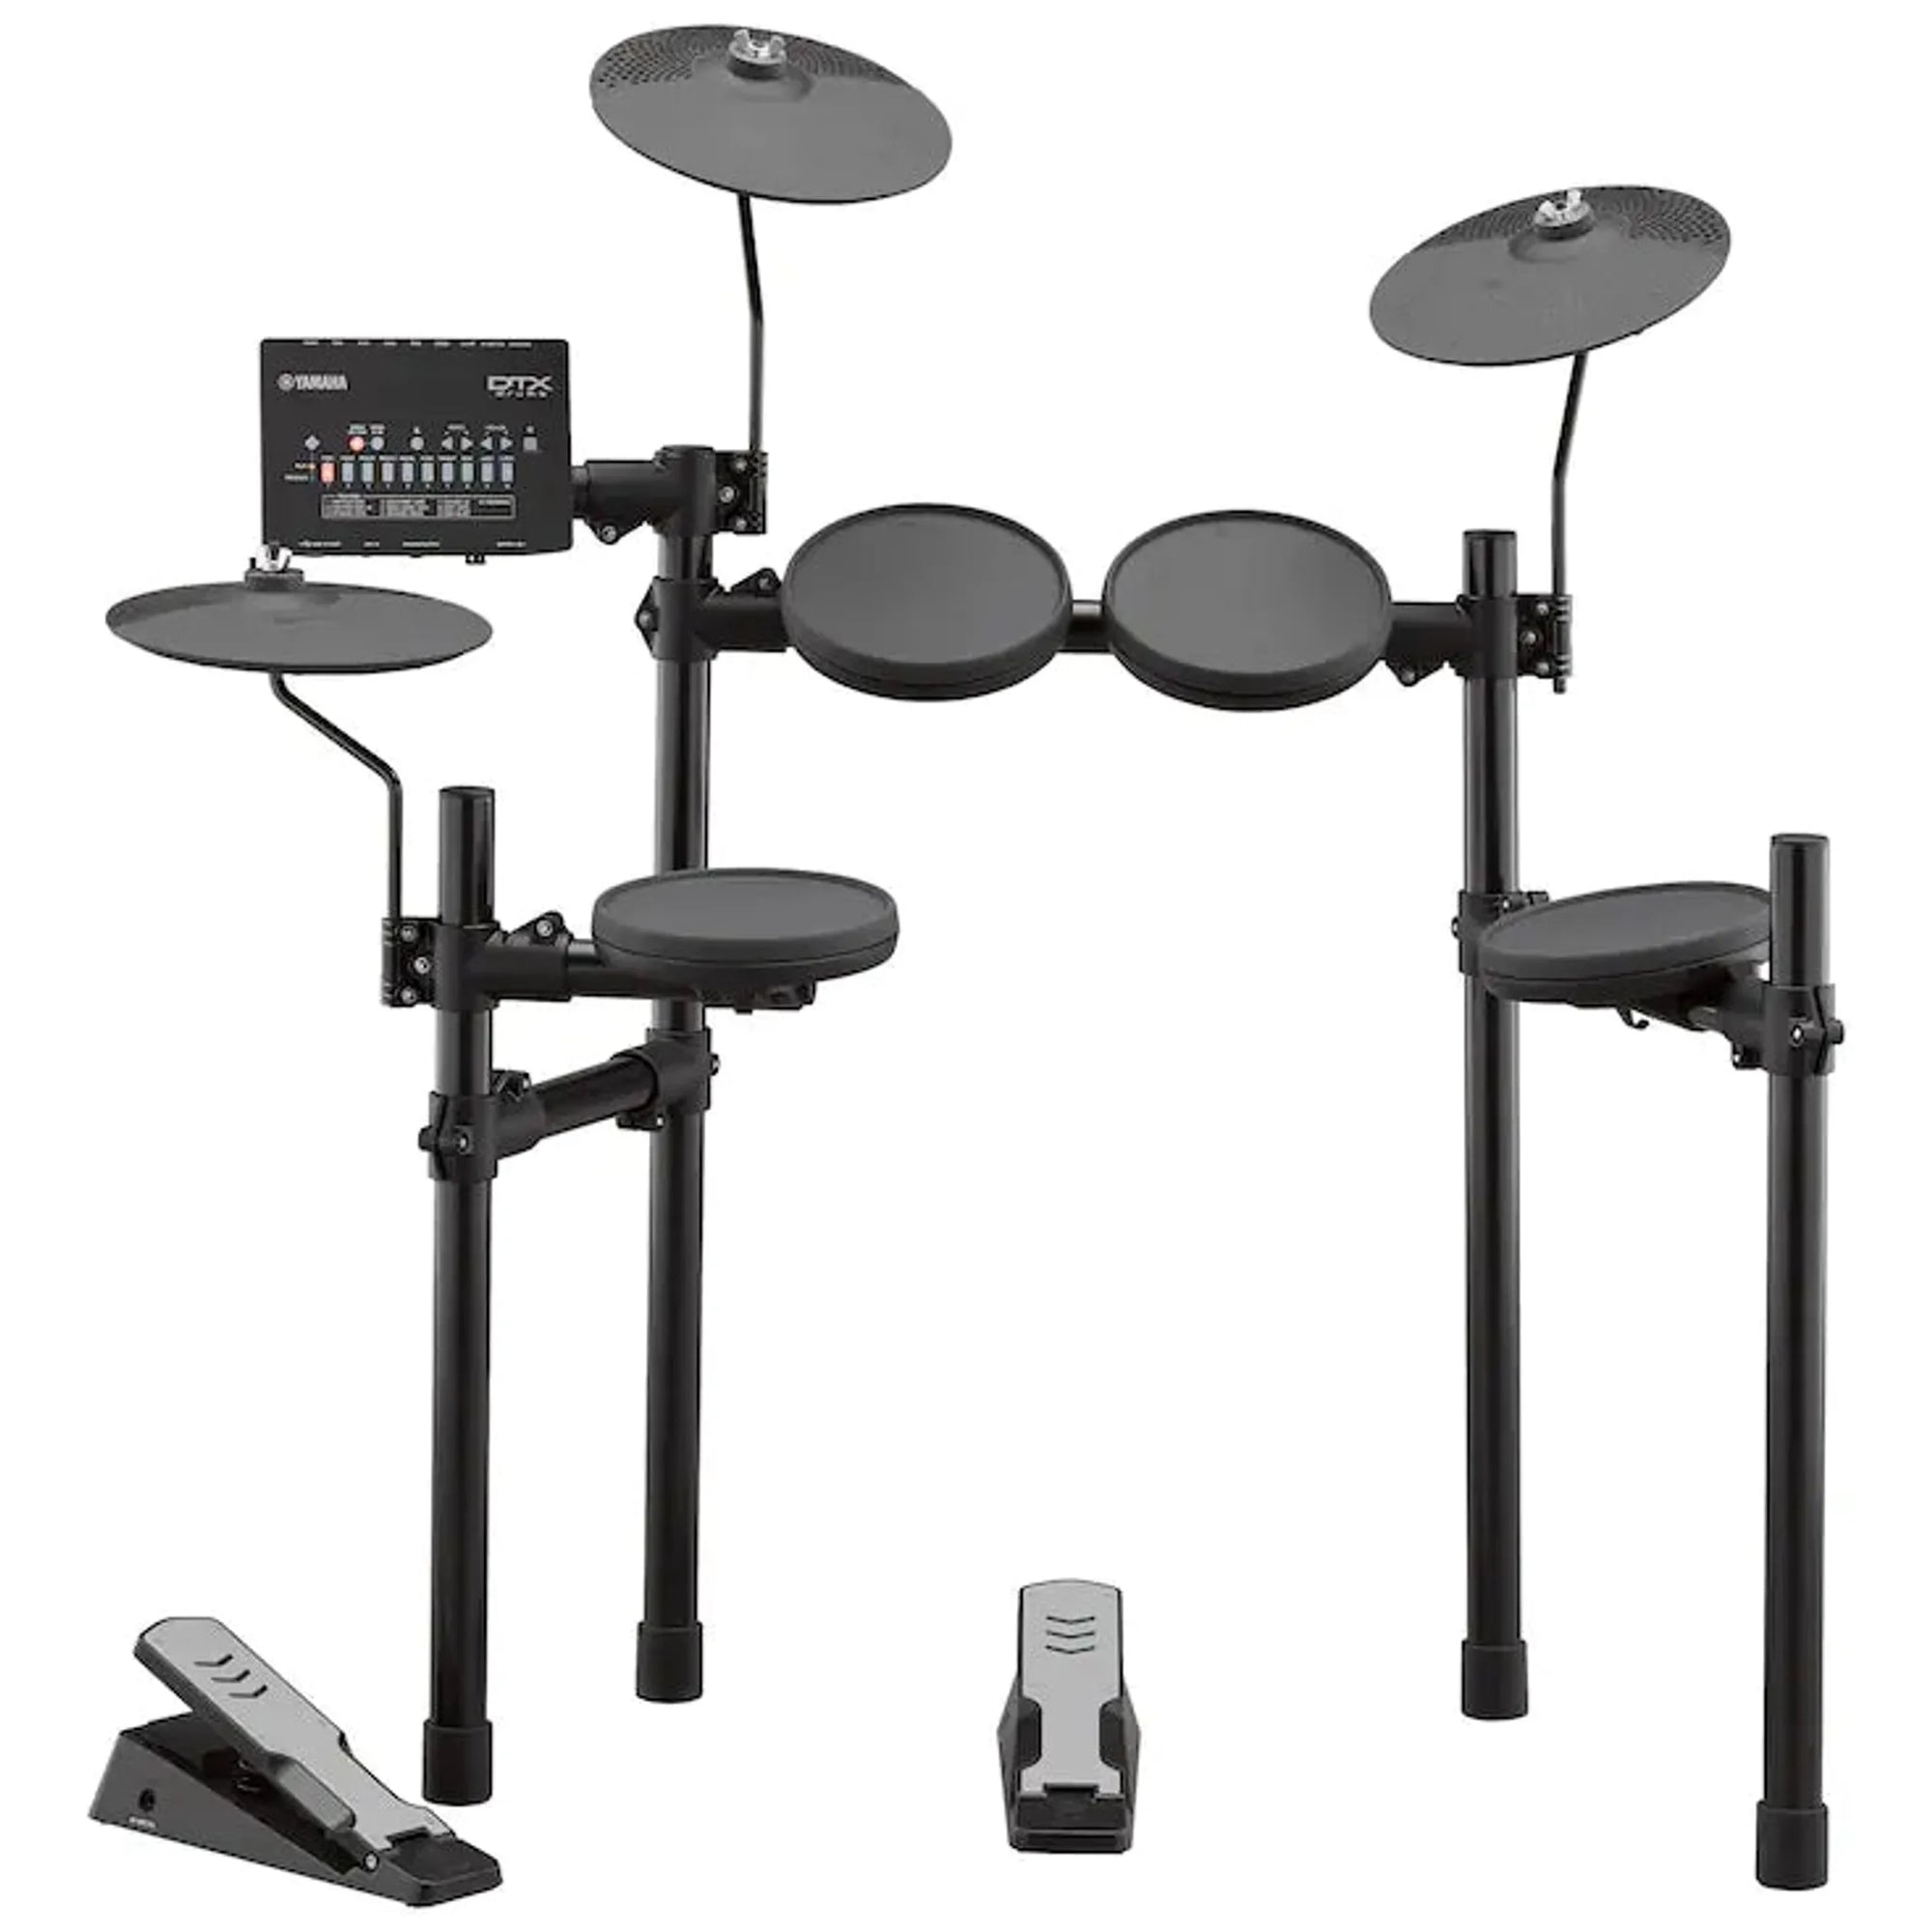 The moment you play the Yamaha DTX402K Plus Electronic Drum Kit is the moment you become a drummer. Let it be your inspiration and give instant expression to your impulses and creativity. DTX402 is the culmination of the commitment Yamaha makes as a drum manufacturer with excellent design and sound quality.